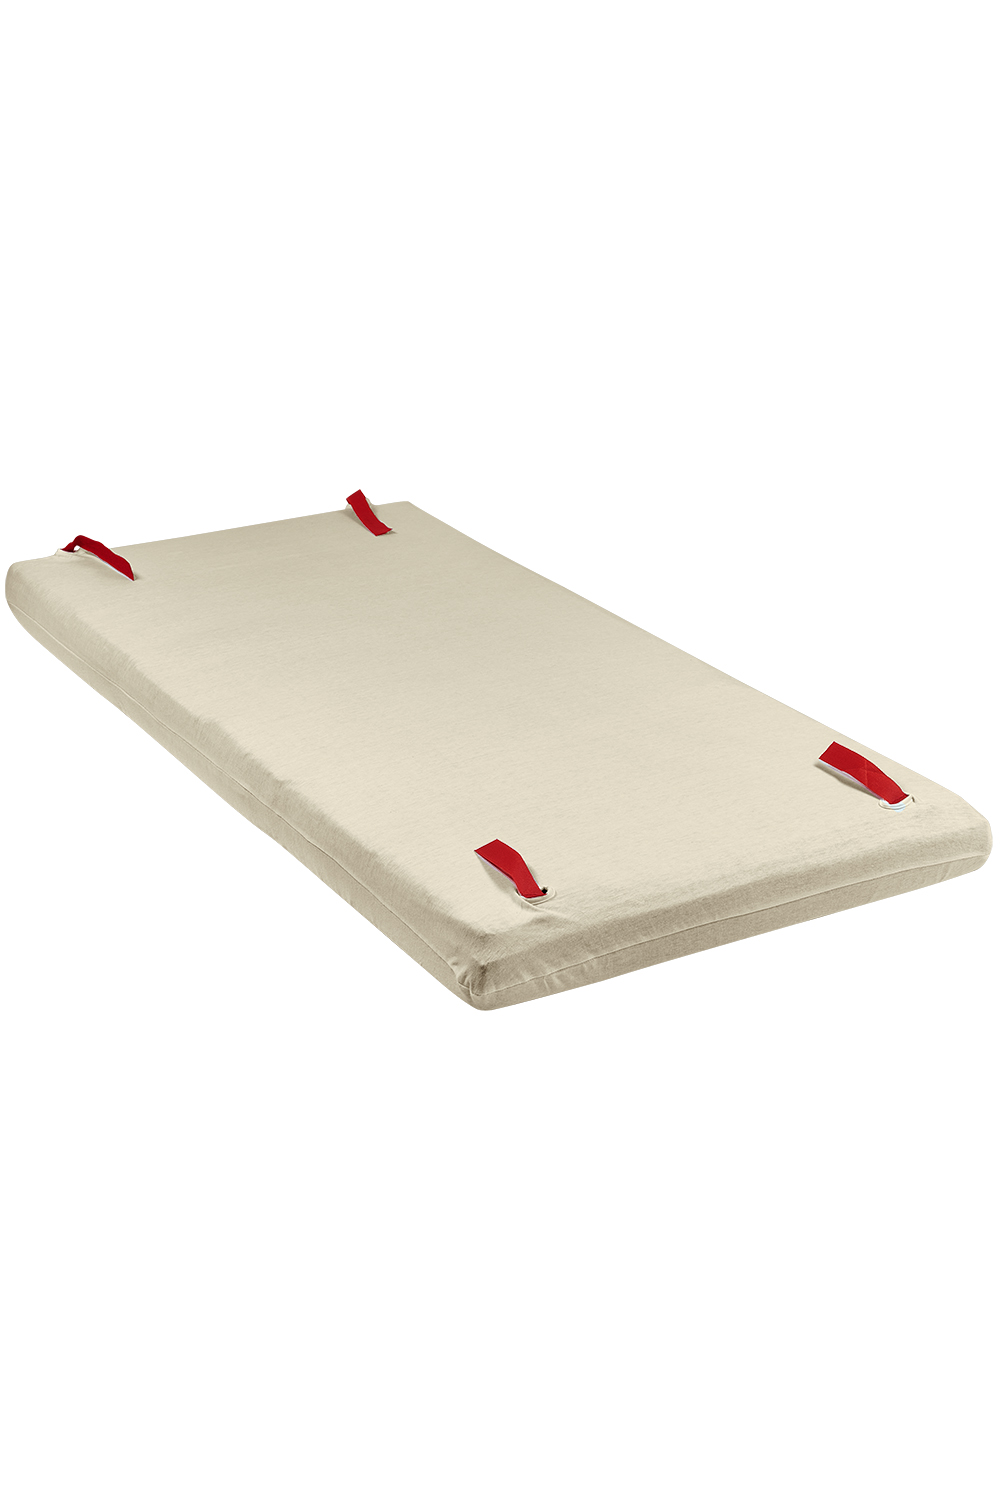 Camping bed mattress cover deluxe Uni - sand - 60x120cm